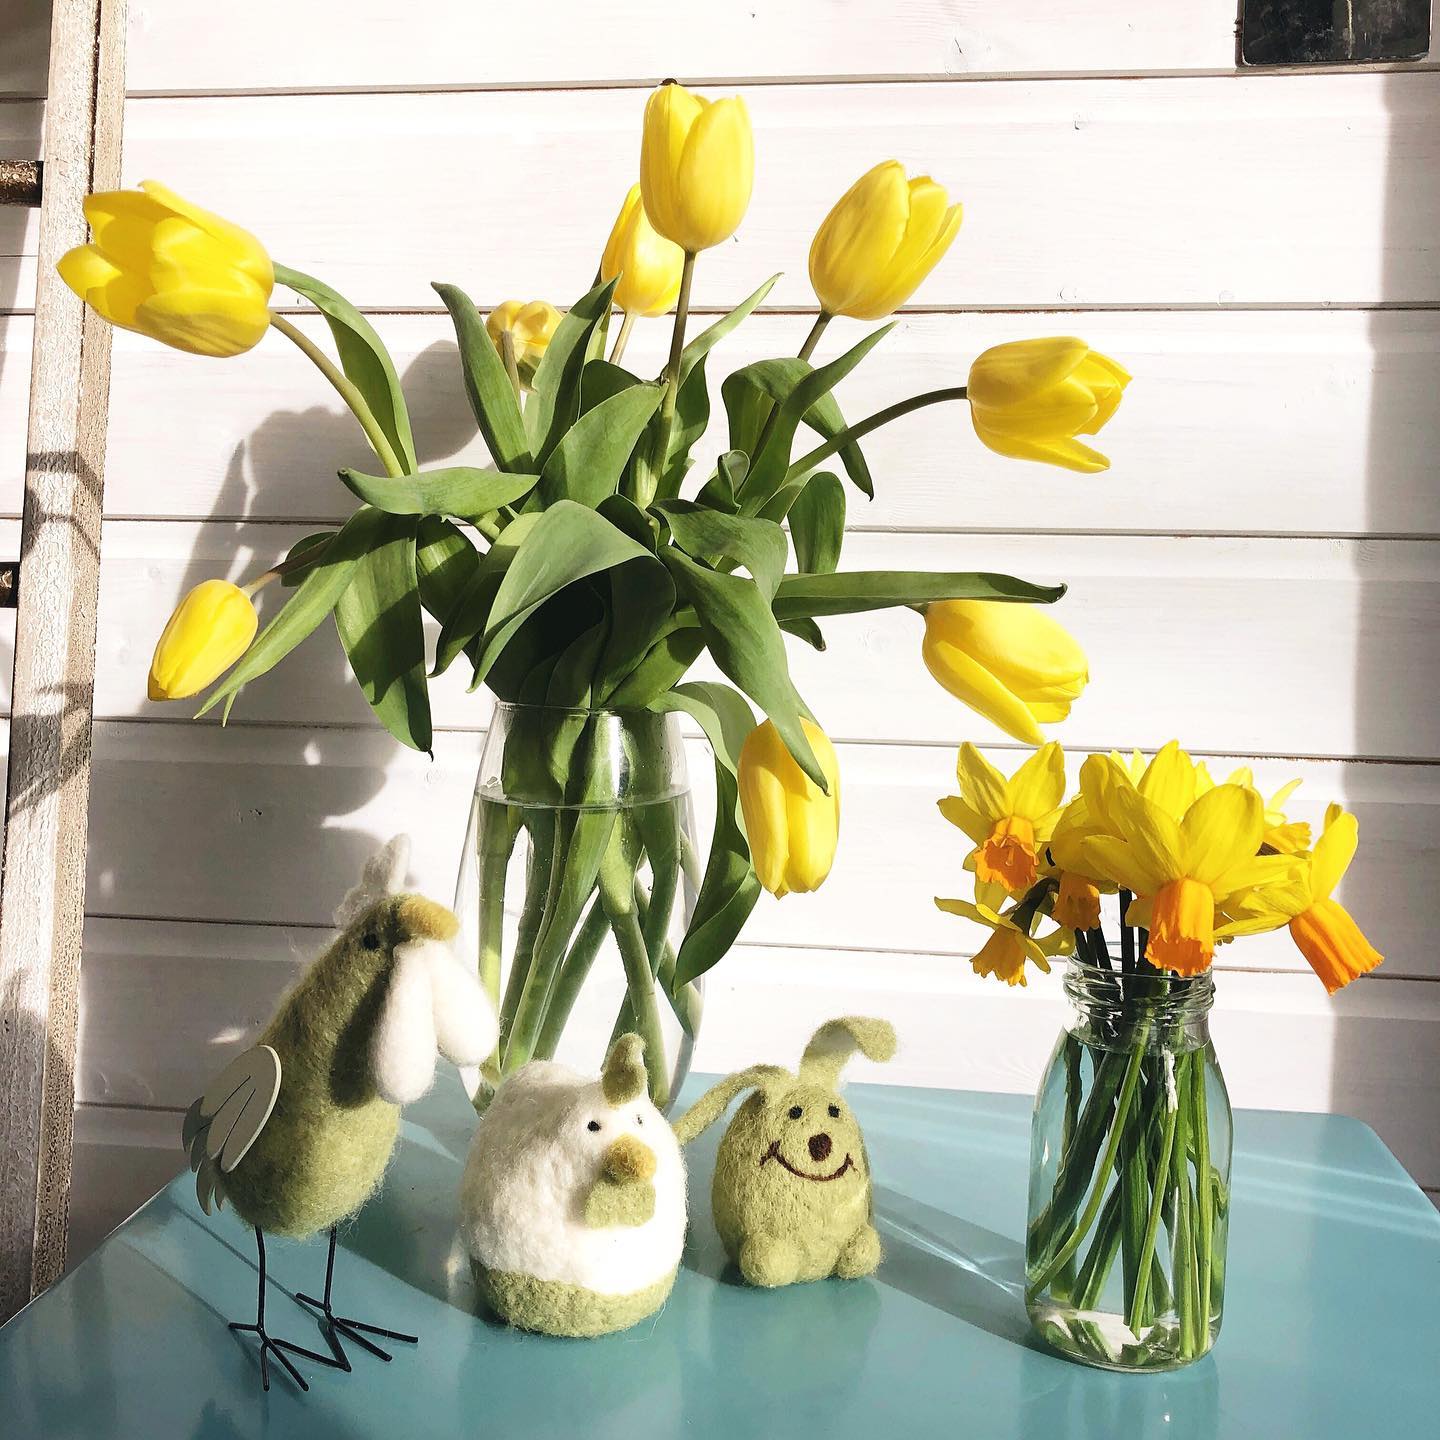 Sunshine and shadows, petals and props. What brought you joy today?